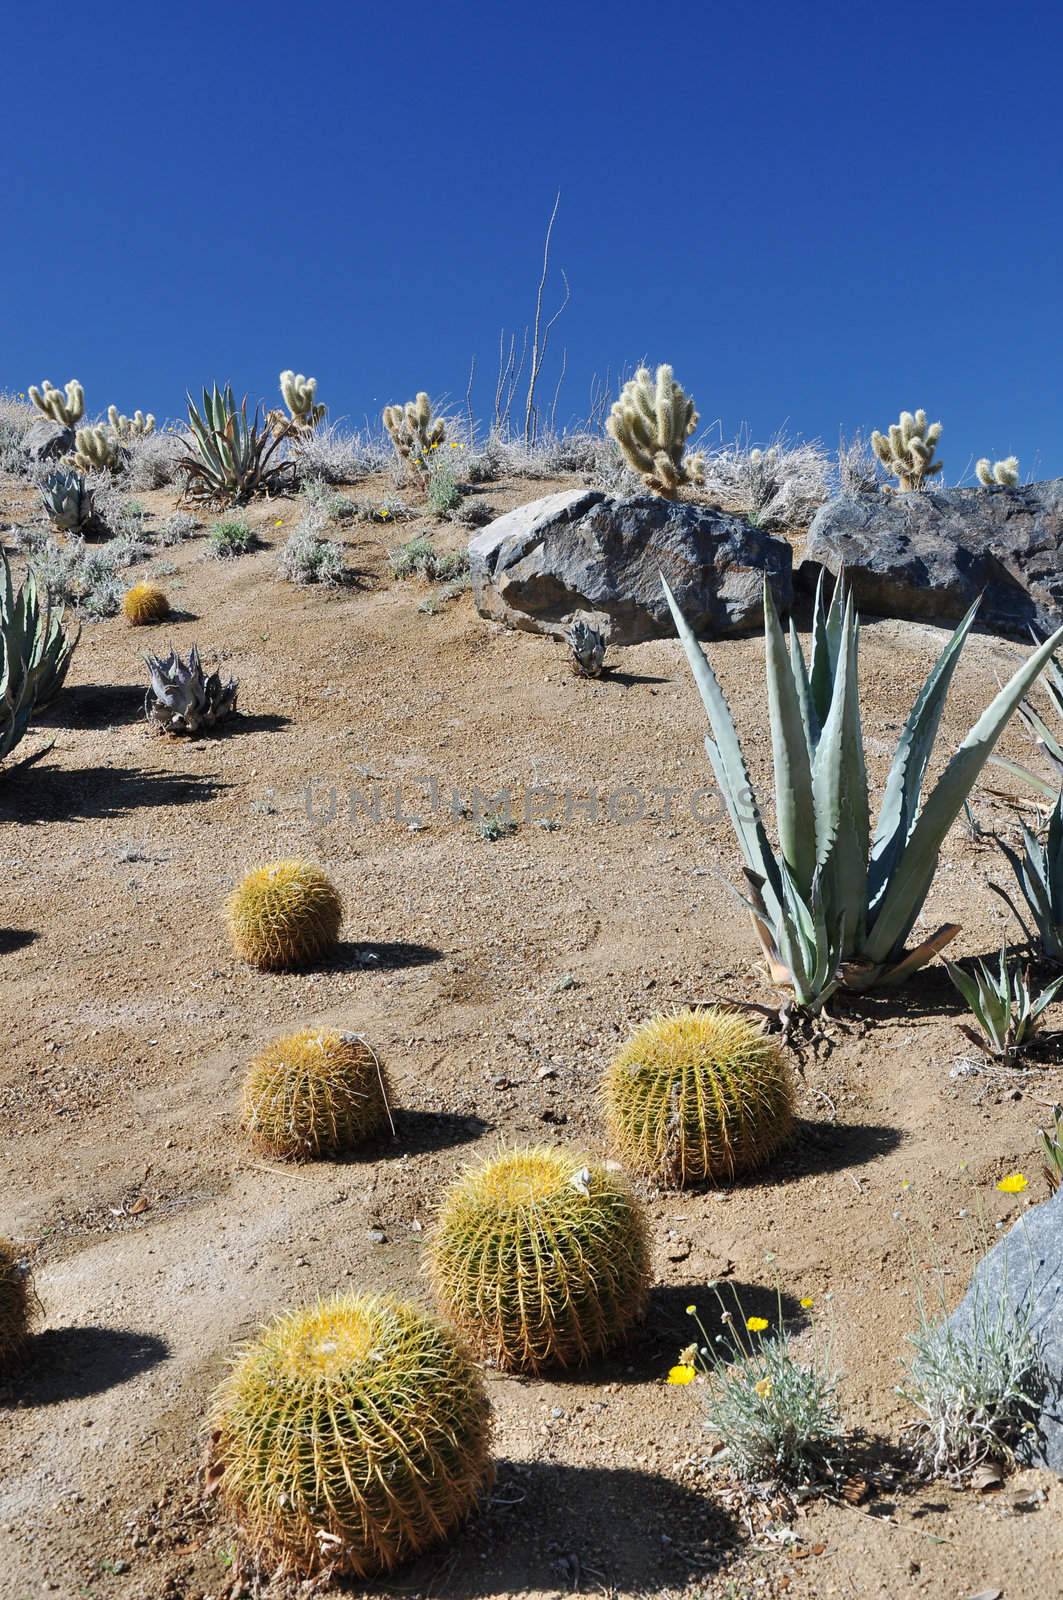 A variety of cactus grows on this hillside near the desert town of Palm Springs, California.